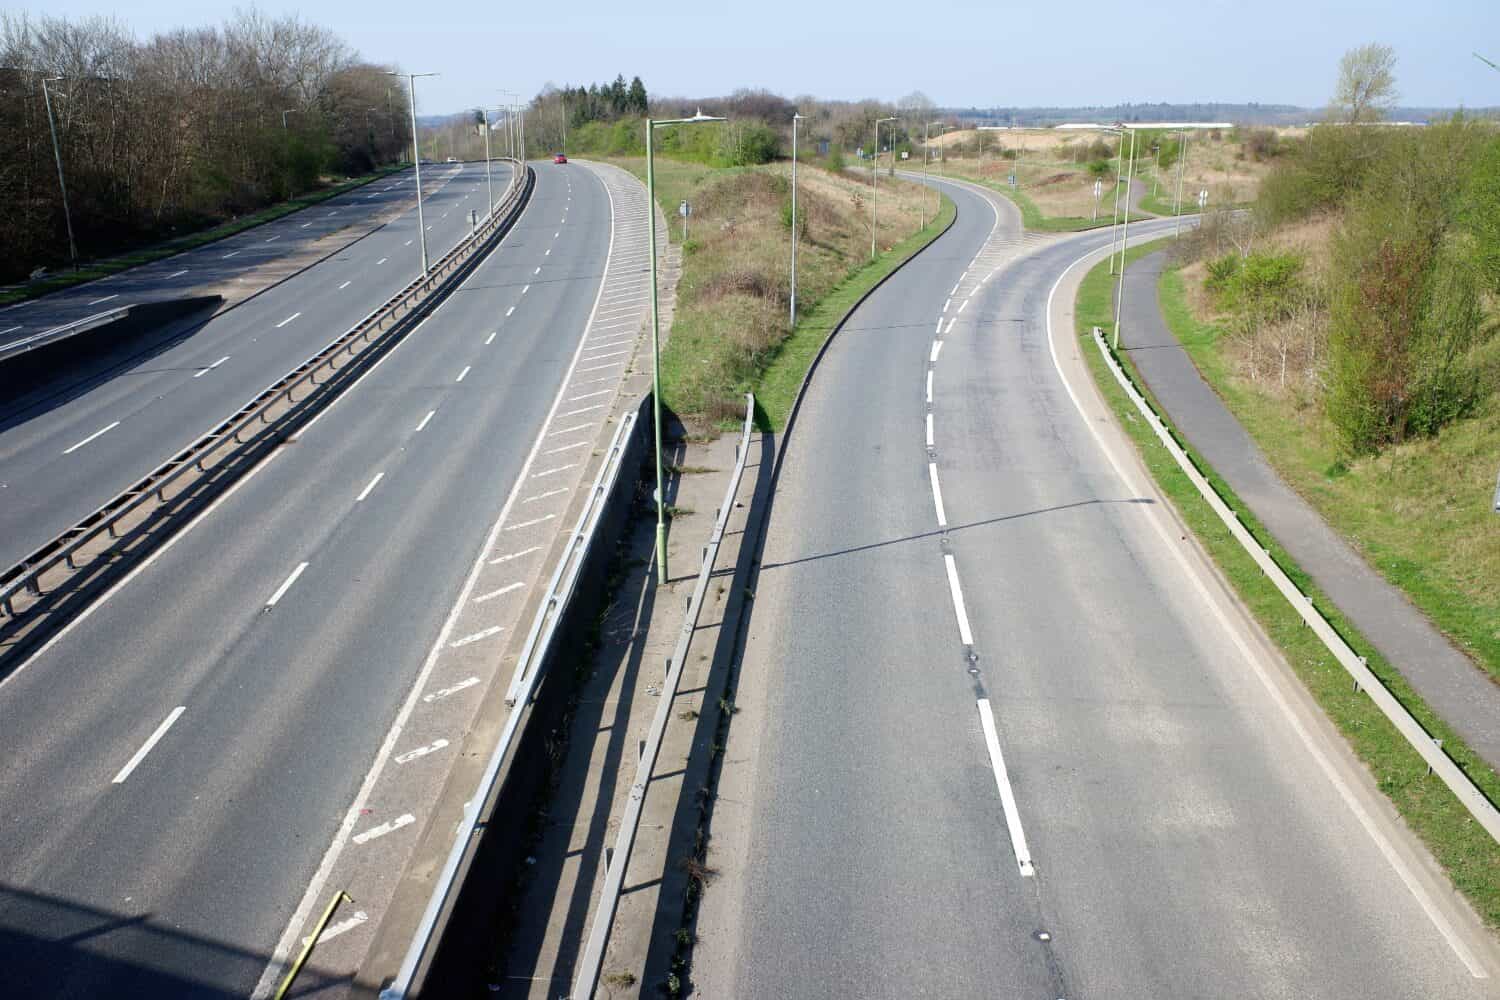 View above the A41 and slip road in Leavesden, North Watford, Hertfordshire, England, UK